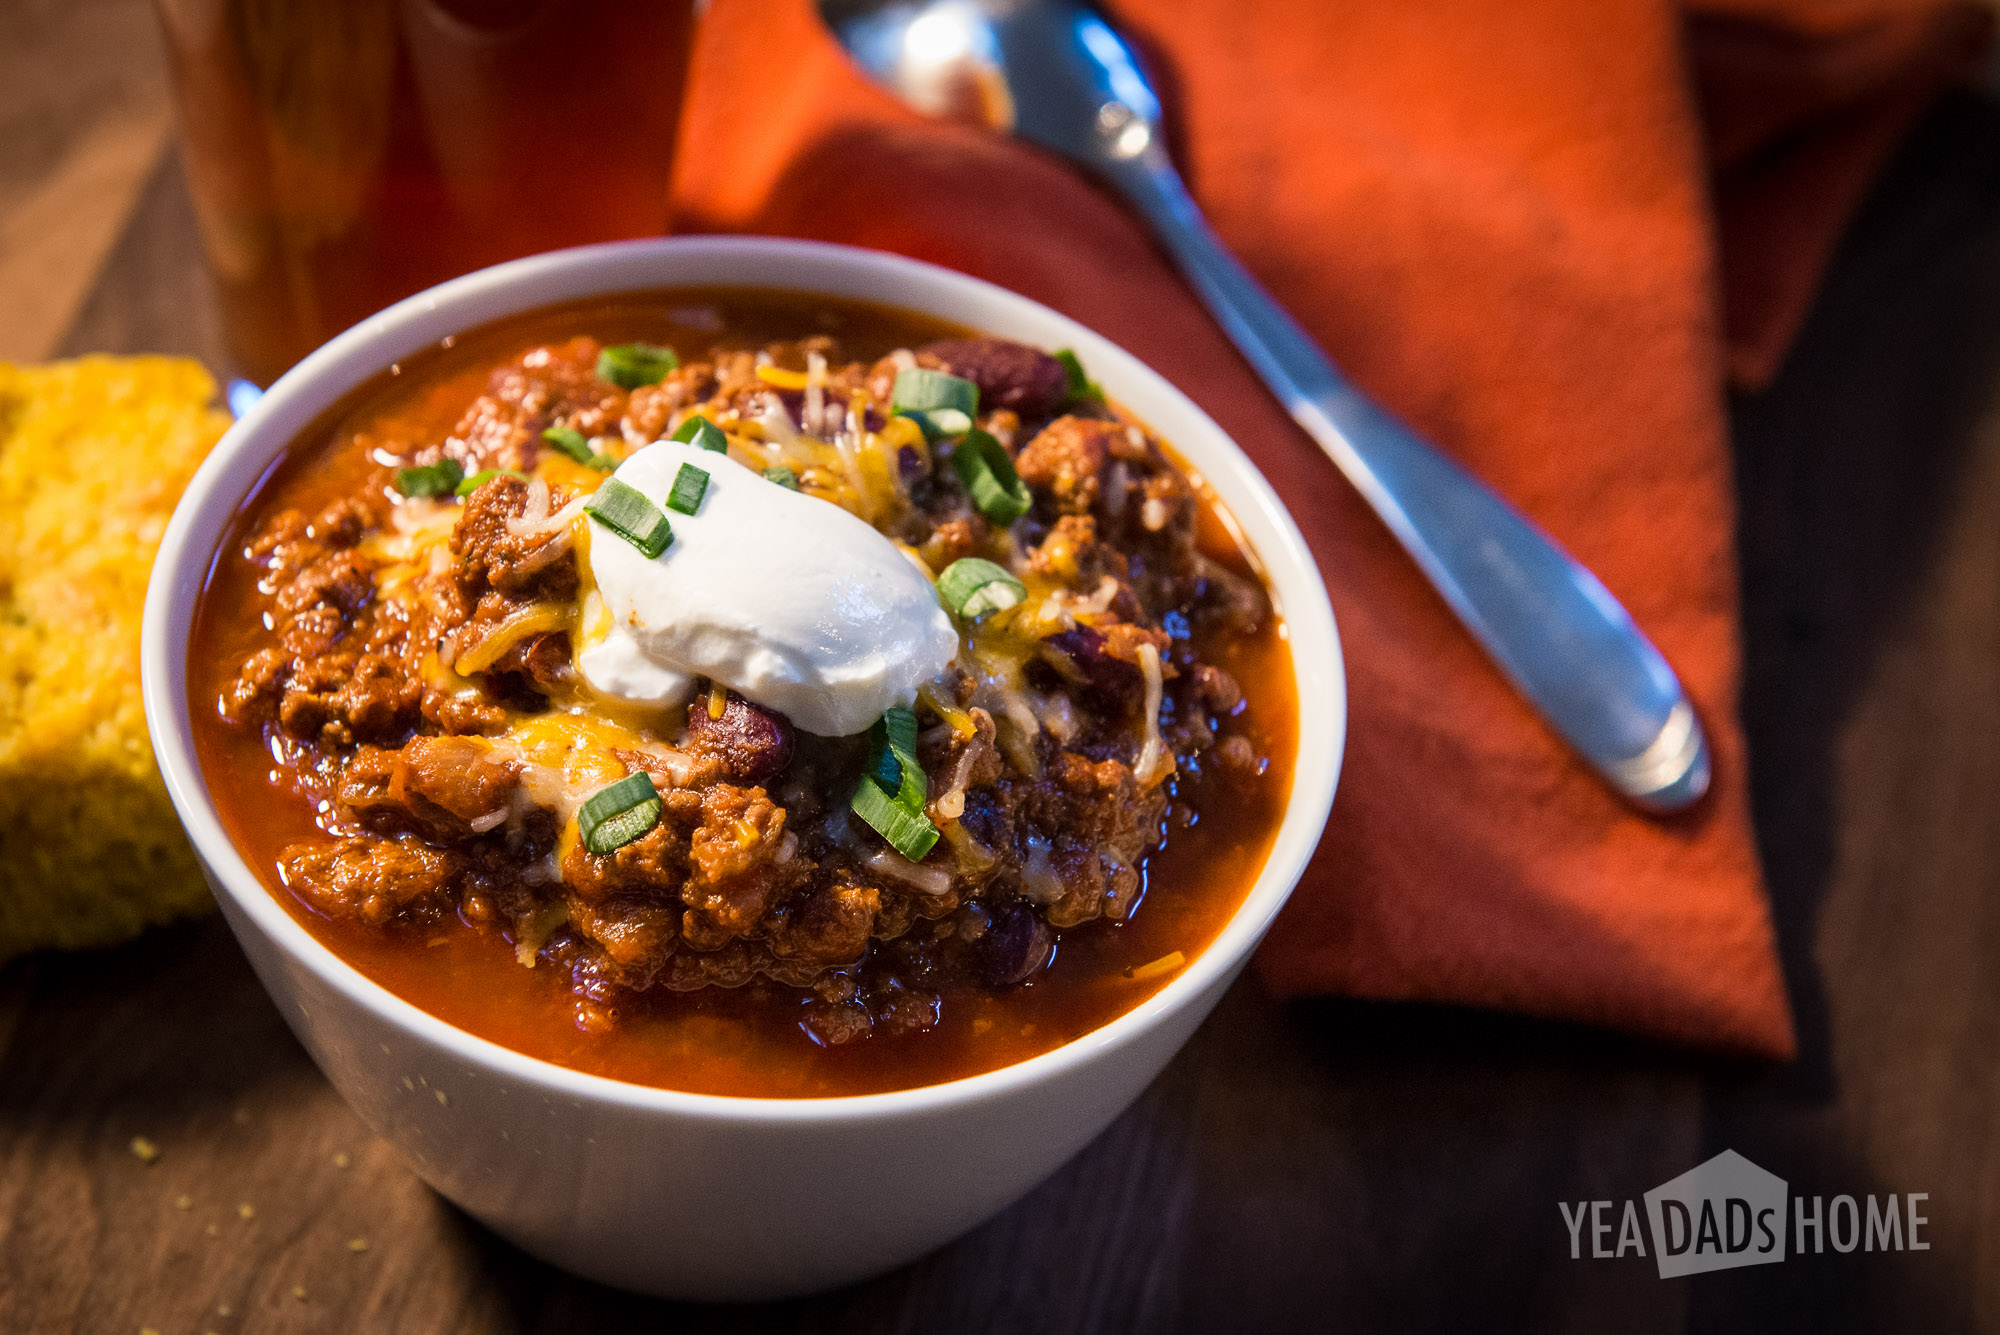 Easy Beef Chili | Yea Dads Home